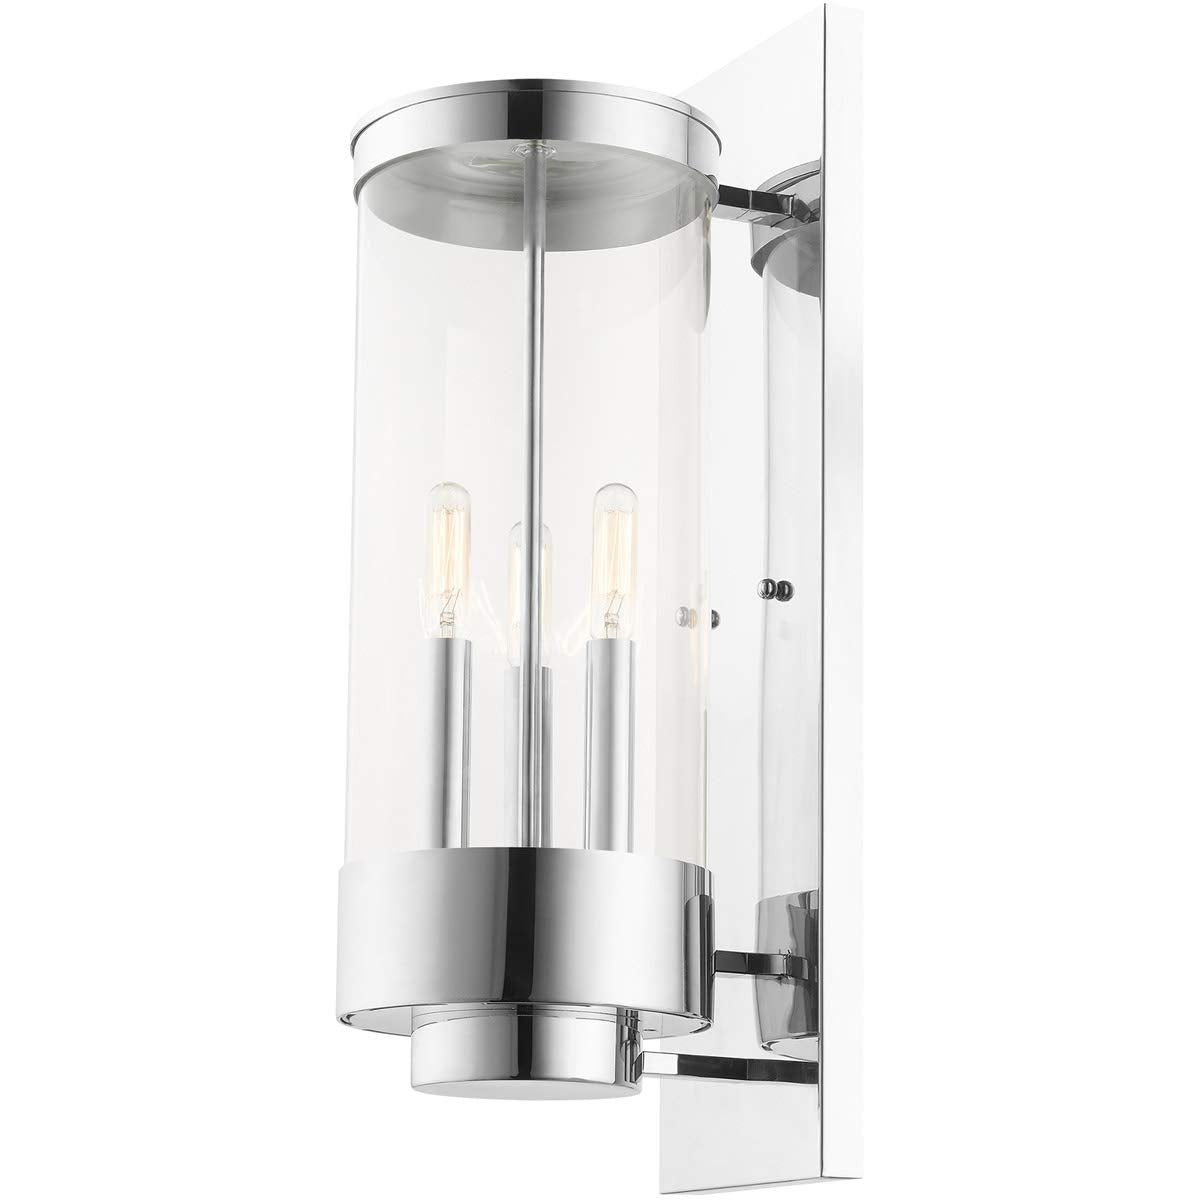 Livex Lighting 20724-05 Hillcrest - Three Light Outdoor Wall Lantern, Polished Chrome Finish with Clear Glass